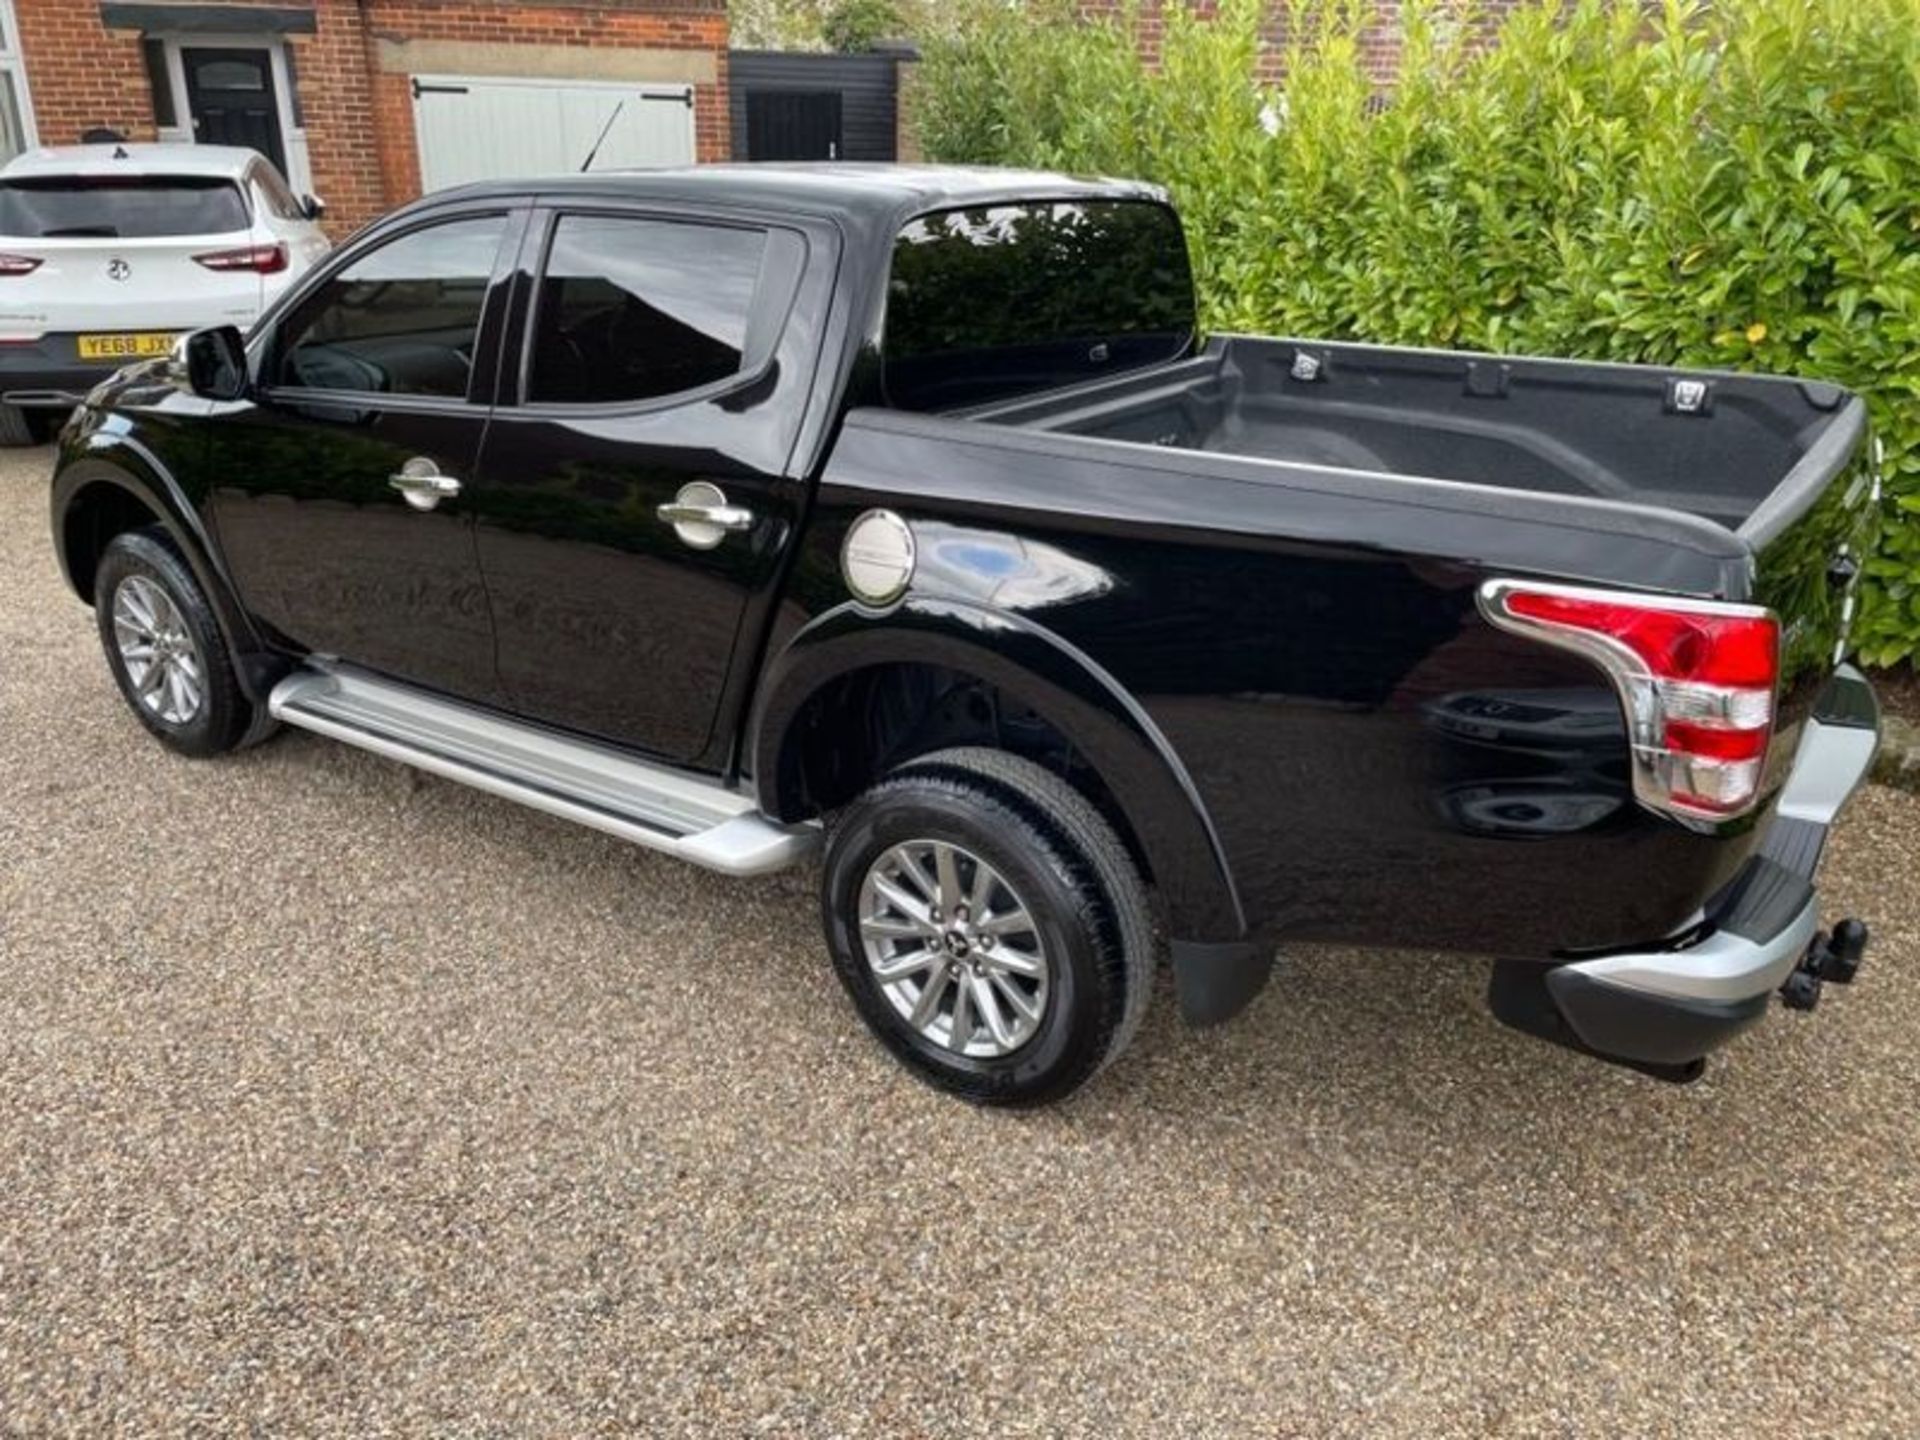 Mitsubishi L200 "Barbarian" Auto (178) 2018 Model - 1 Owner -Leather -Sat Nav -Cruise - Fully Loaded - Image 3 of 7